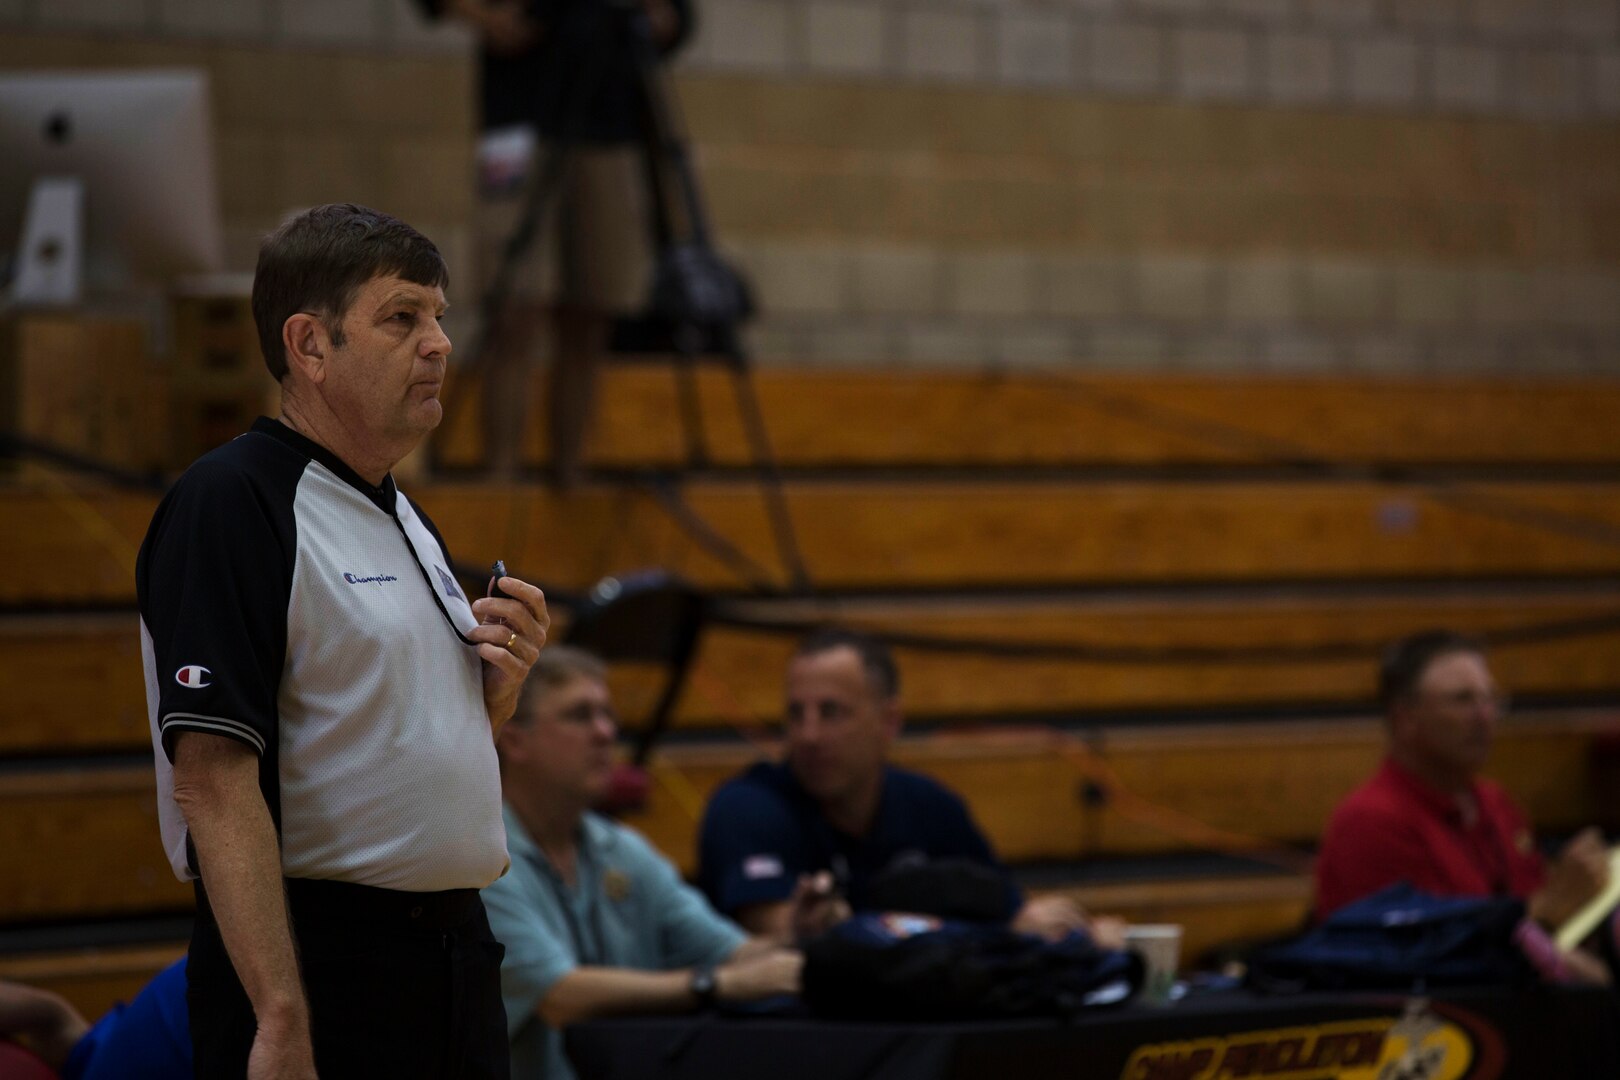 Head Referee Pat Rosenow watches the Brazil vs. France game at the Conseil International Du Sport Militaire (CISM) World Military Women’s Basketball tournament July 28 at Camp Pendleton, California. The base is hosting the CISM World Military Women’s Basketball Championship July 25 through July 29. The event is an opportunity for high-caliber U.S. service member athletes to be positively engaged with their peers from nations around the globe. (U.S. Marine Corps photo by Sgt. Abbey Perria)